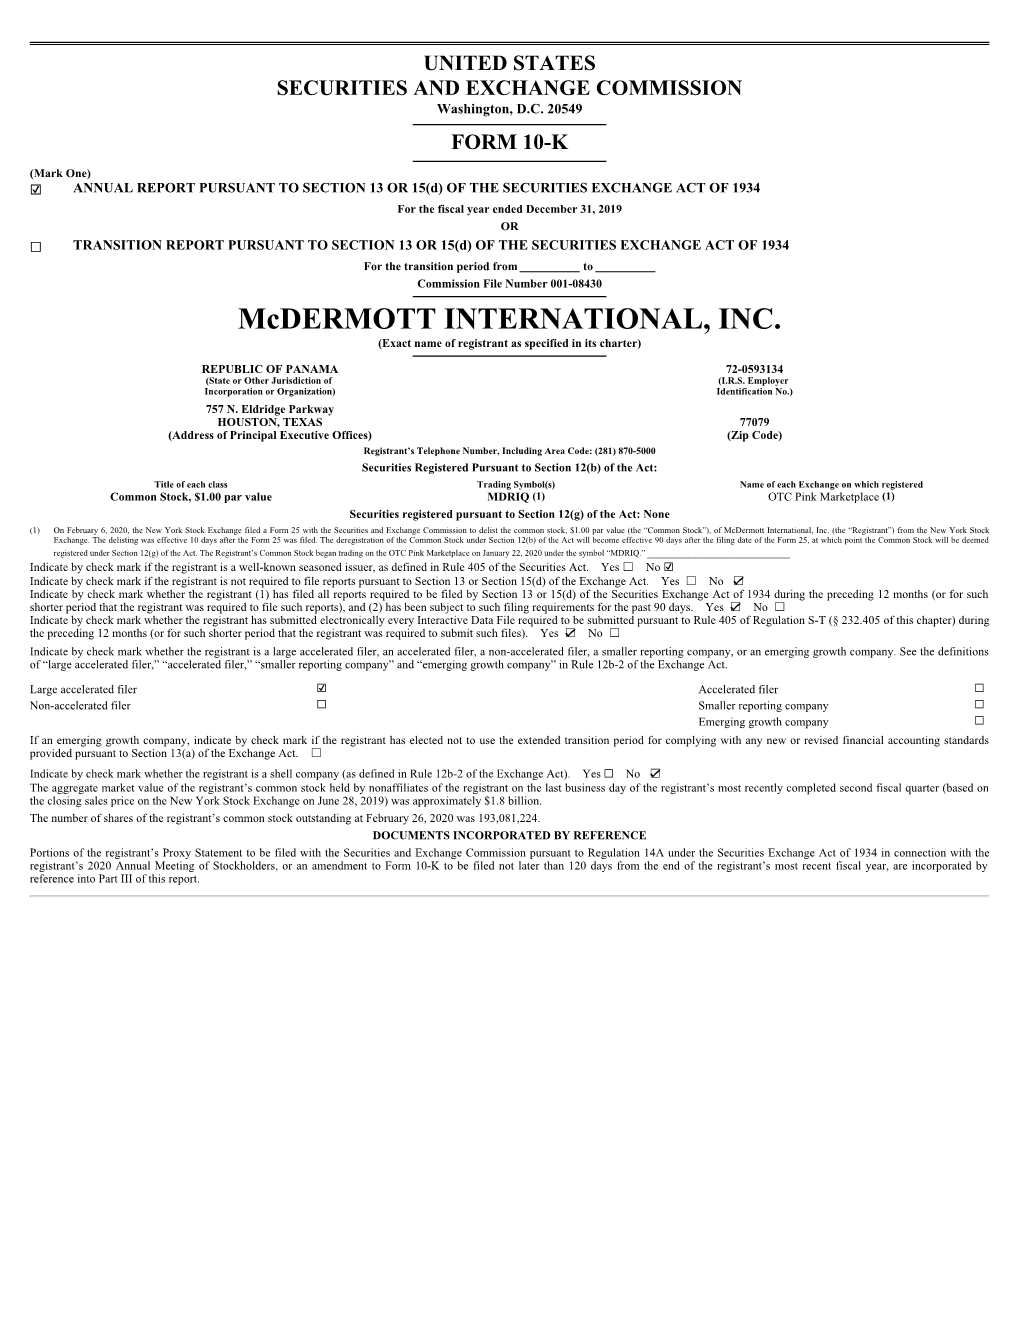 Mcdermott INTERNATIONAL, INC. (Exact Name of Registrant As Specified in Its Charter)